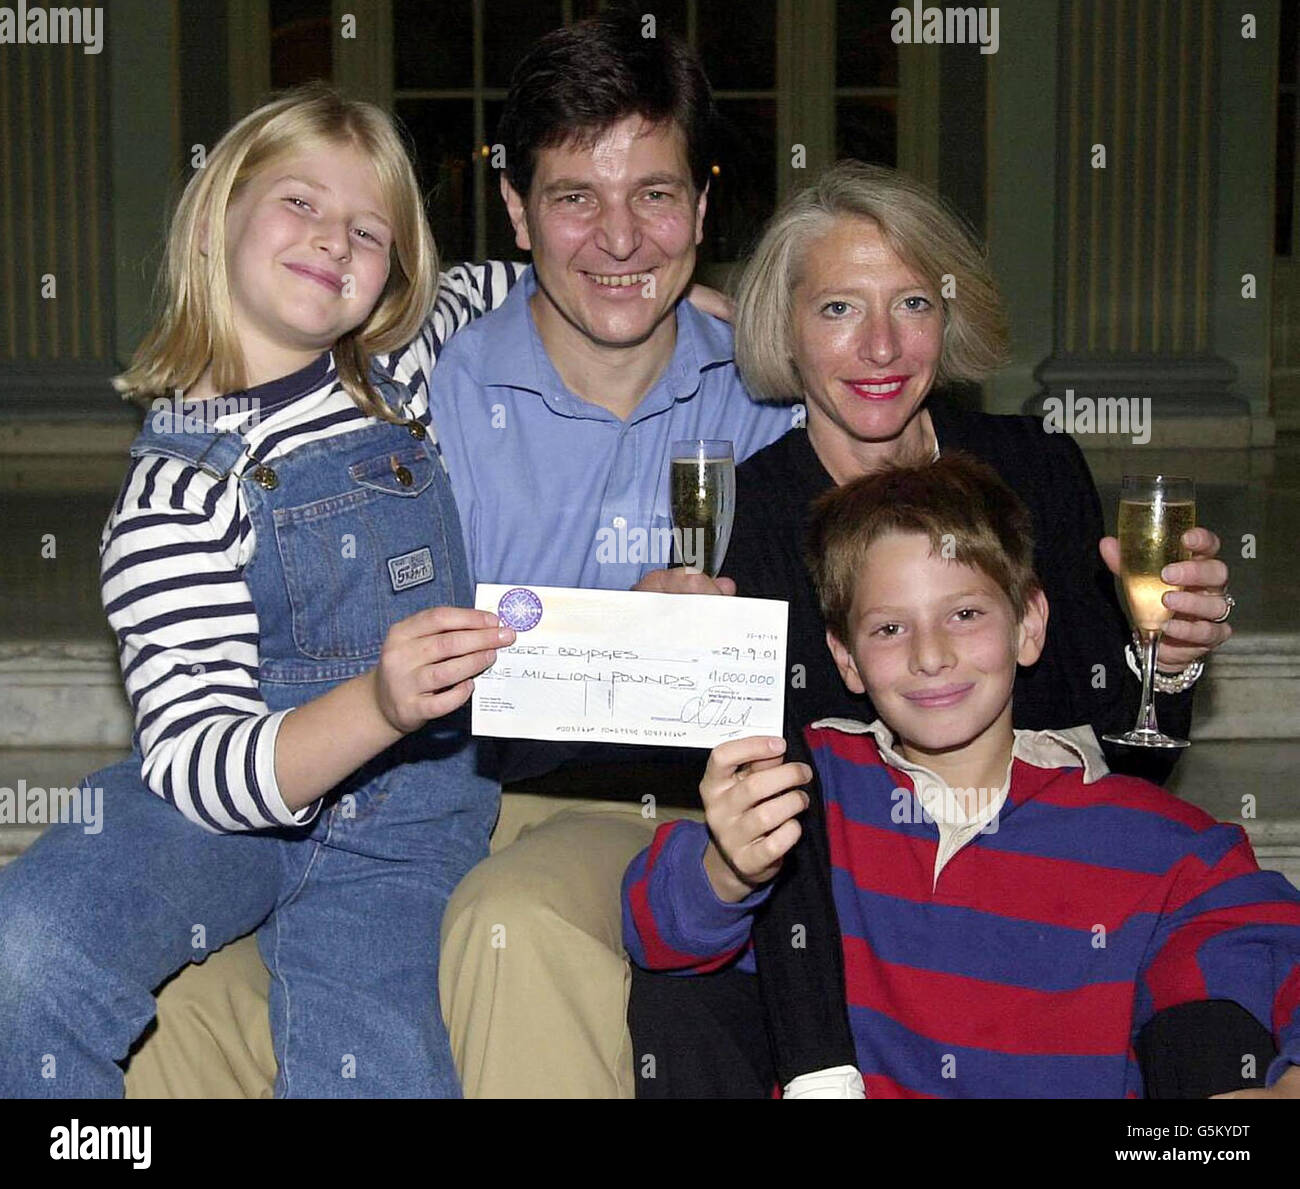 Robert Brydges the latest jackpot winner on Who Wants To Be A Millionaire? with wife Marilyn, his son Kempe, 10, and daughter Catherine, nine, holding the 1 million pound cheque at a press conference in London. * Mr Brydges, 47, of Holland Park, west London, became the fourth million pound winner of the show, which is due to be transmitted on 29/9/01. Stock Photo